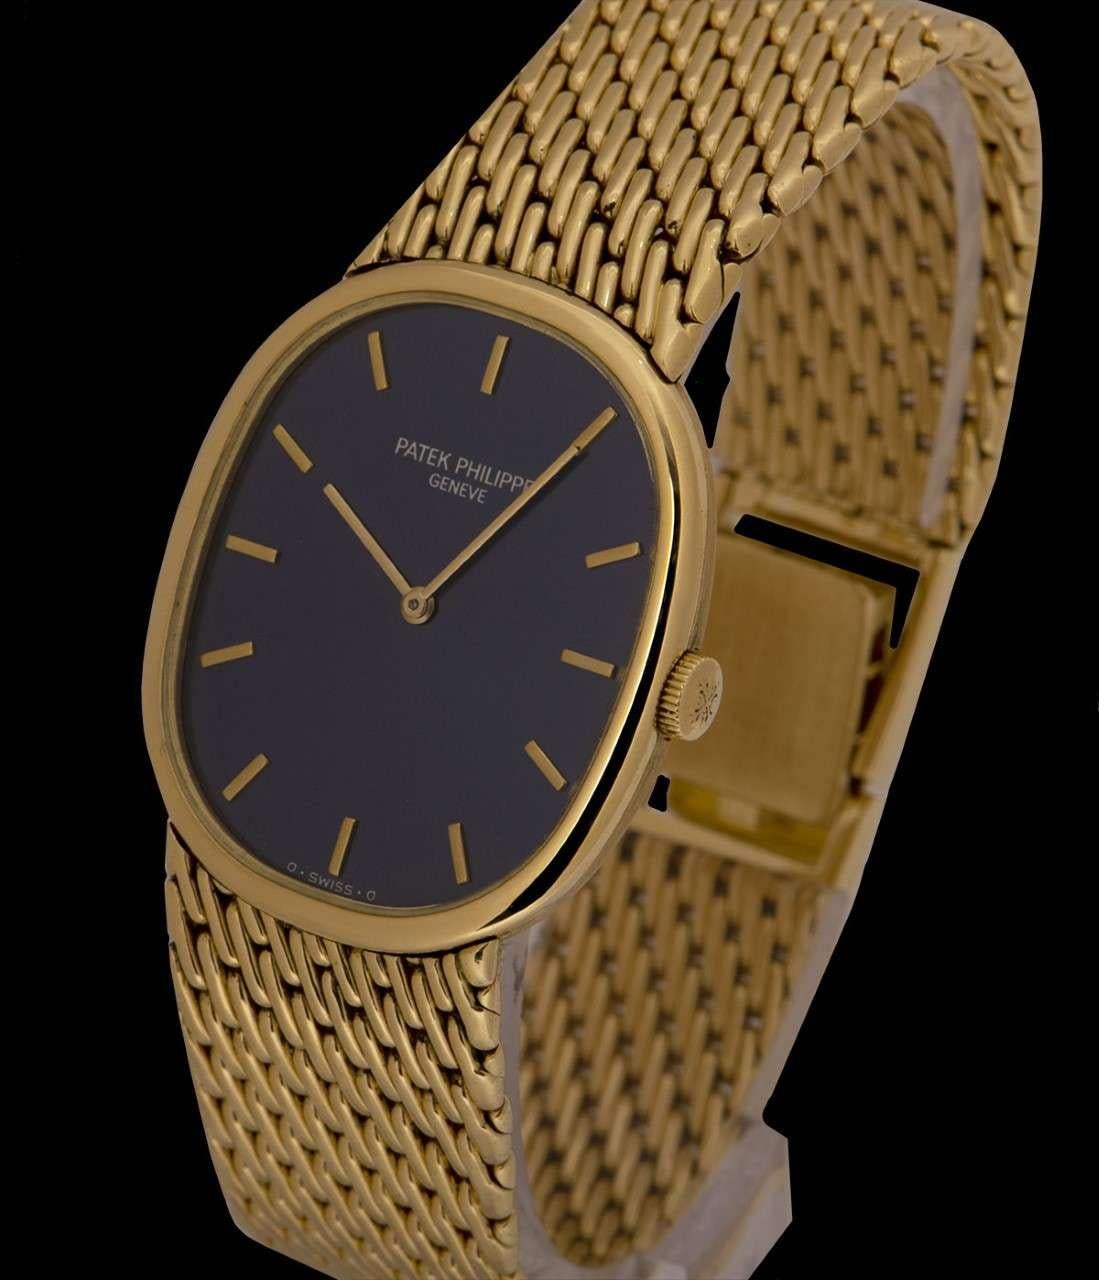 An 18k Yellow Gold Golden Ellipse Gents Wristwatch, blue dial with applied hour markers, a fixed 18k yellow gold bezel, an 18k yellow gold bracelet with an 18k yellow gold jewellery style clasp, sapphire glass, manual wind movement, in excellent